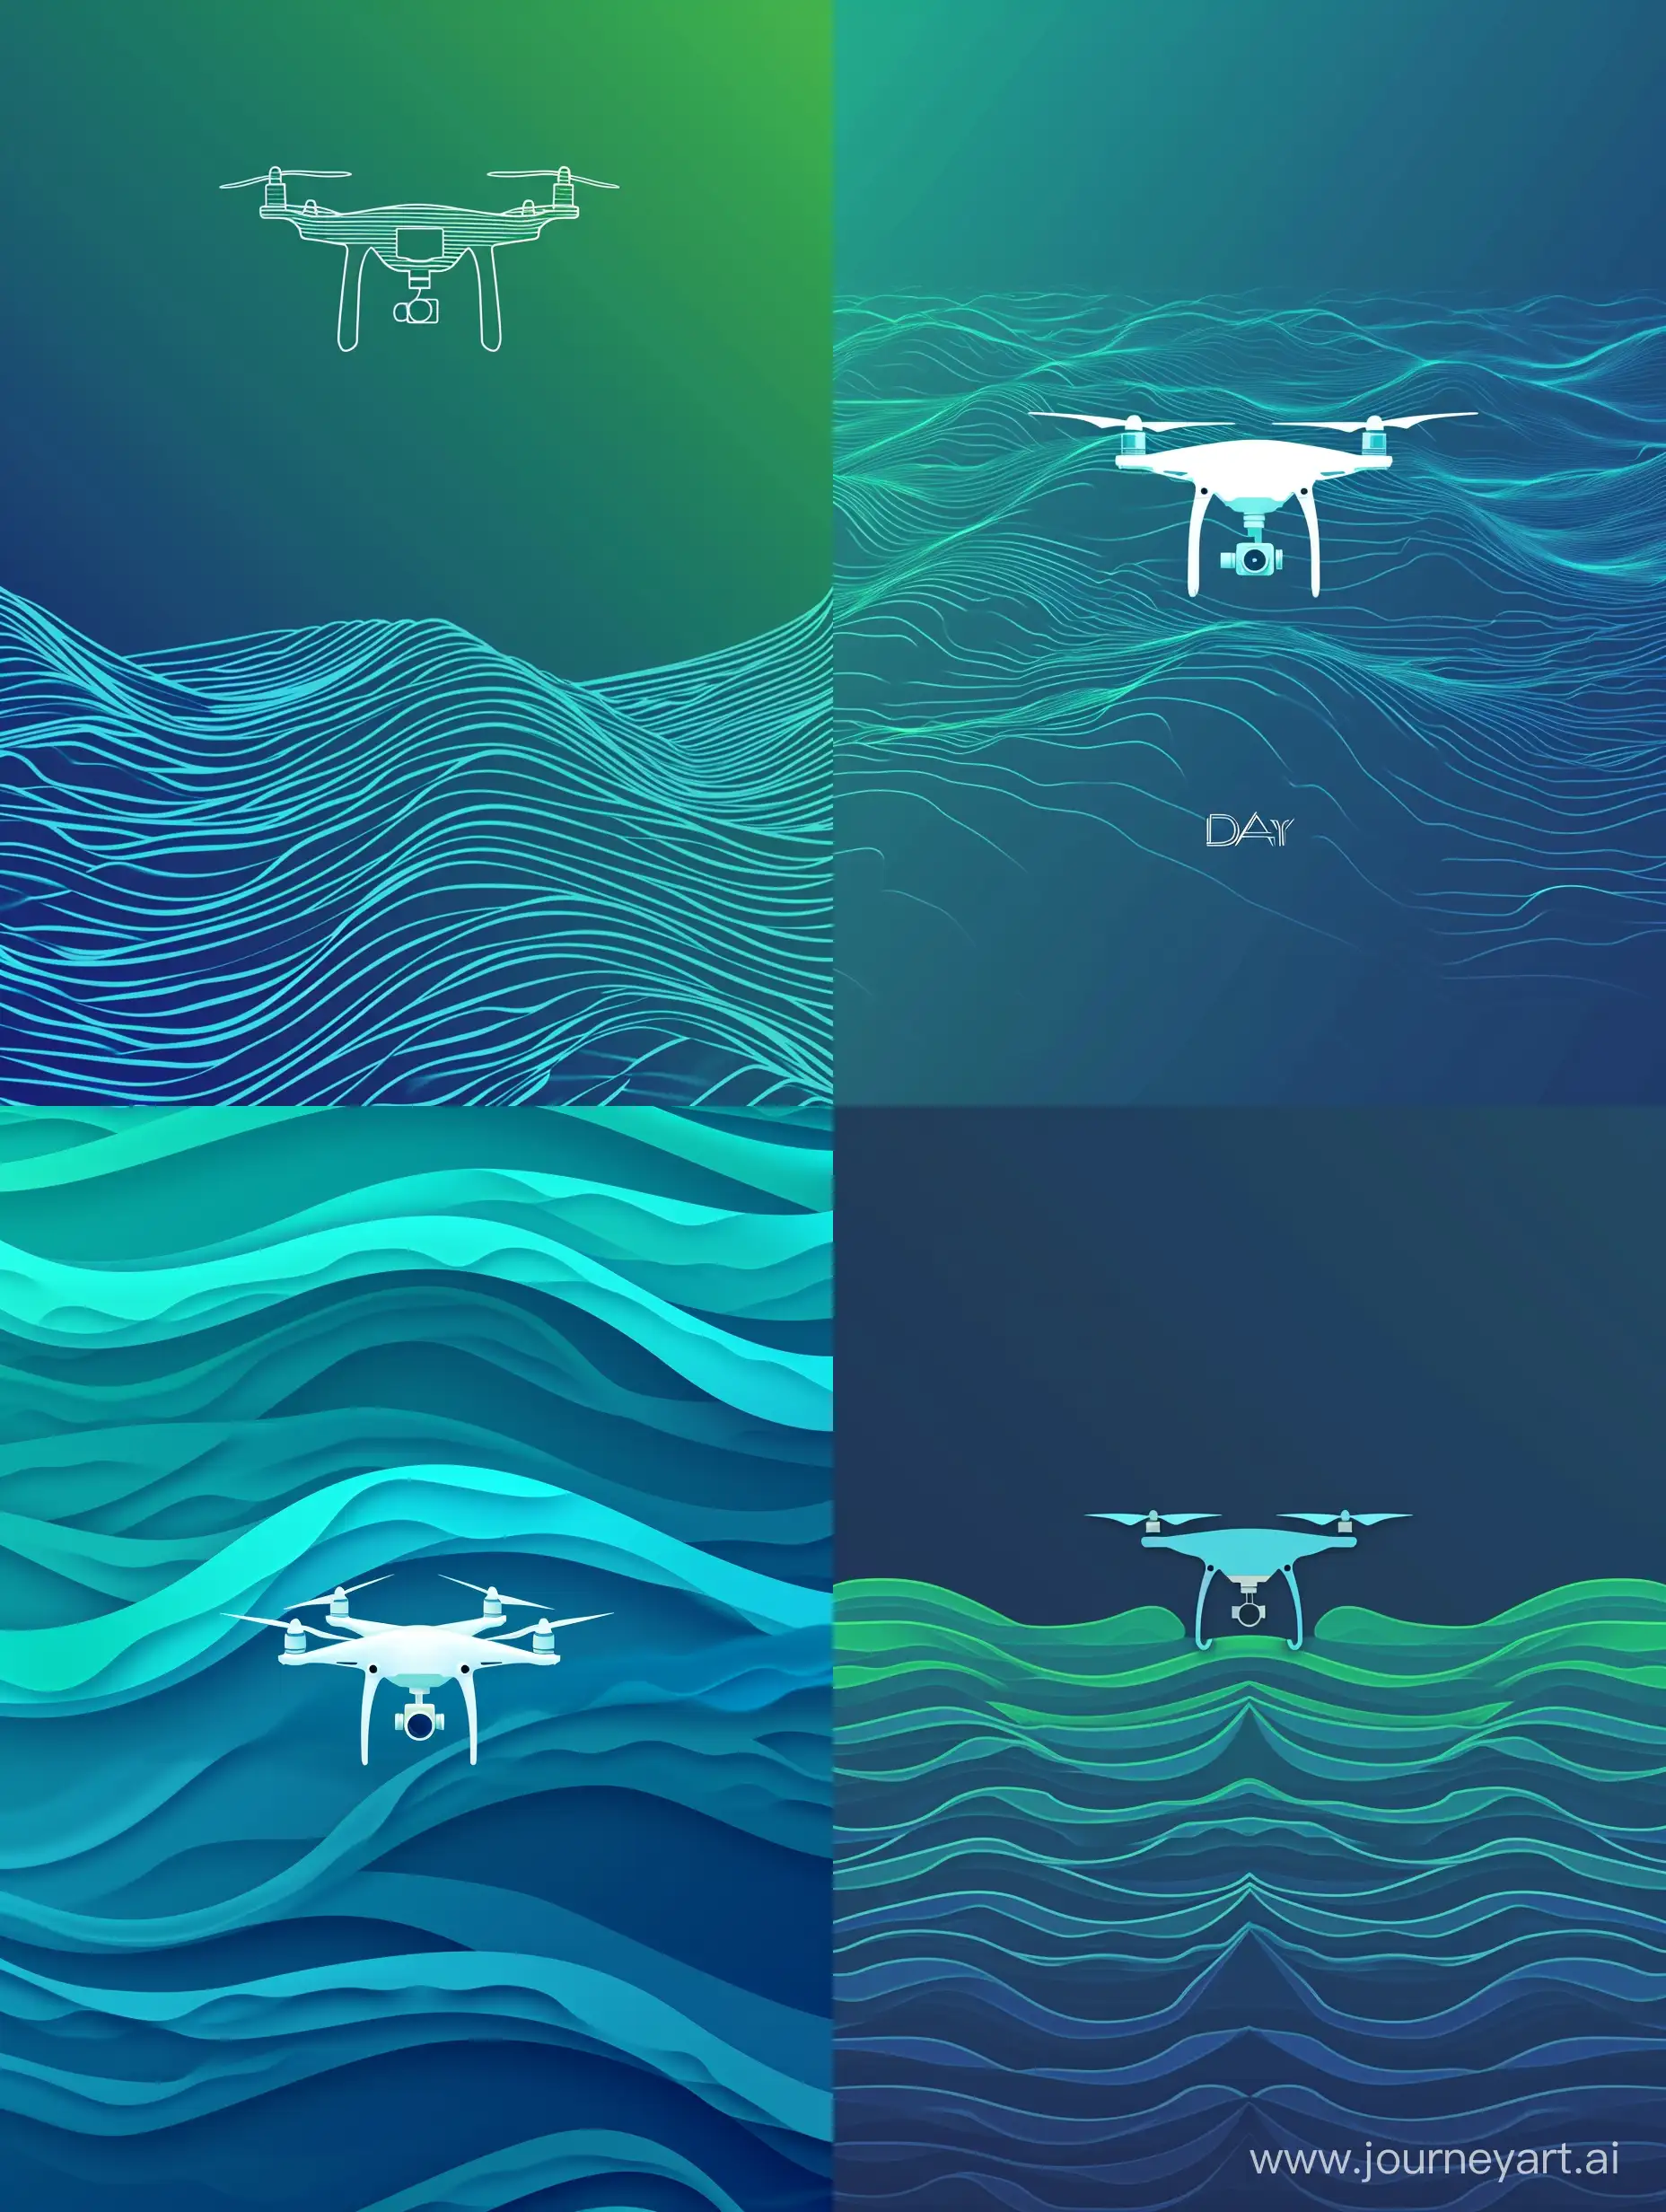 Oceanic-Drone-Logo-in-Serene-Blue-and-Green-Waves